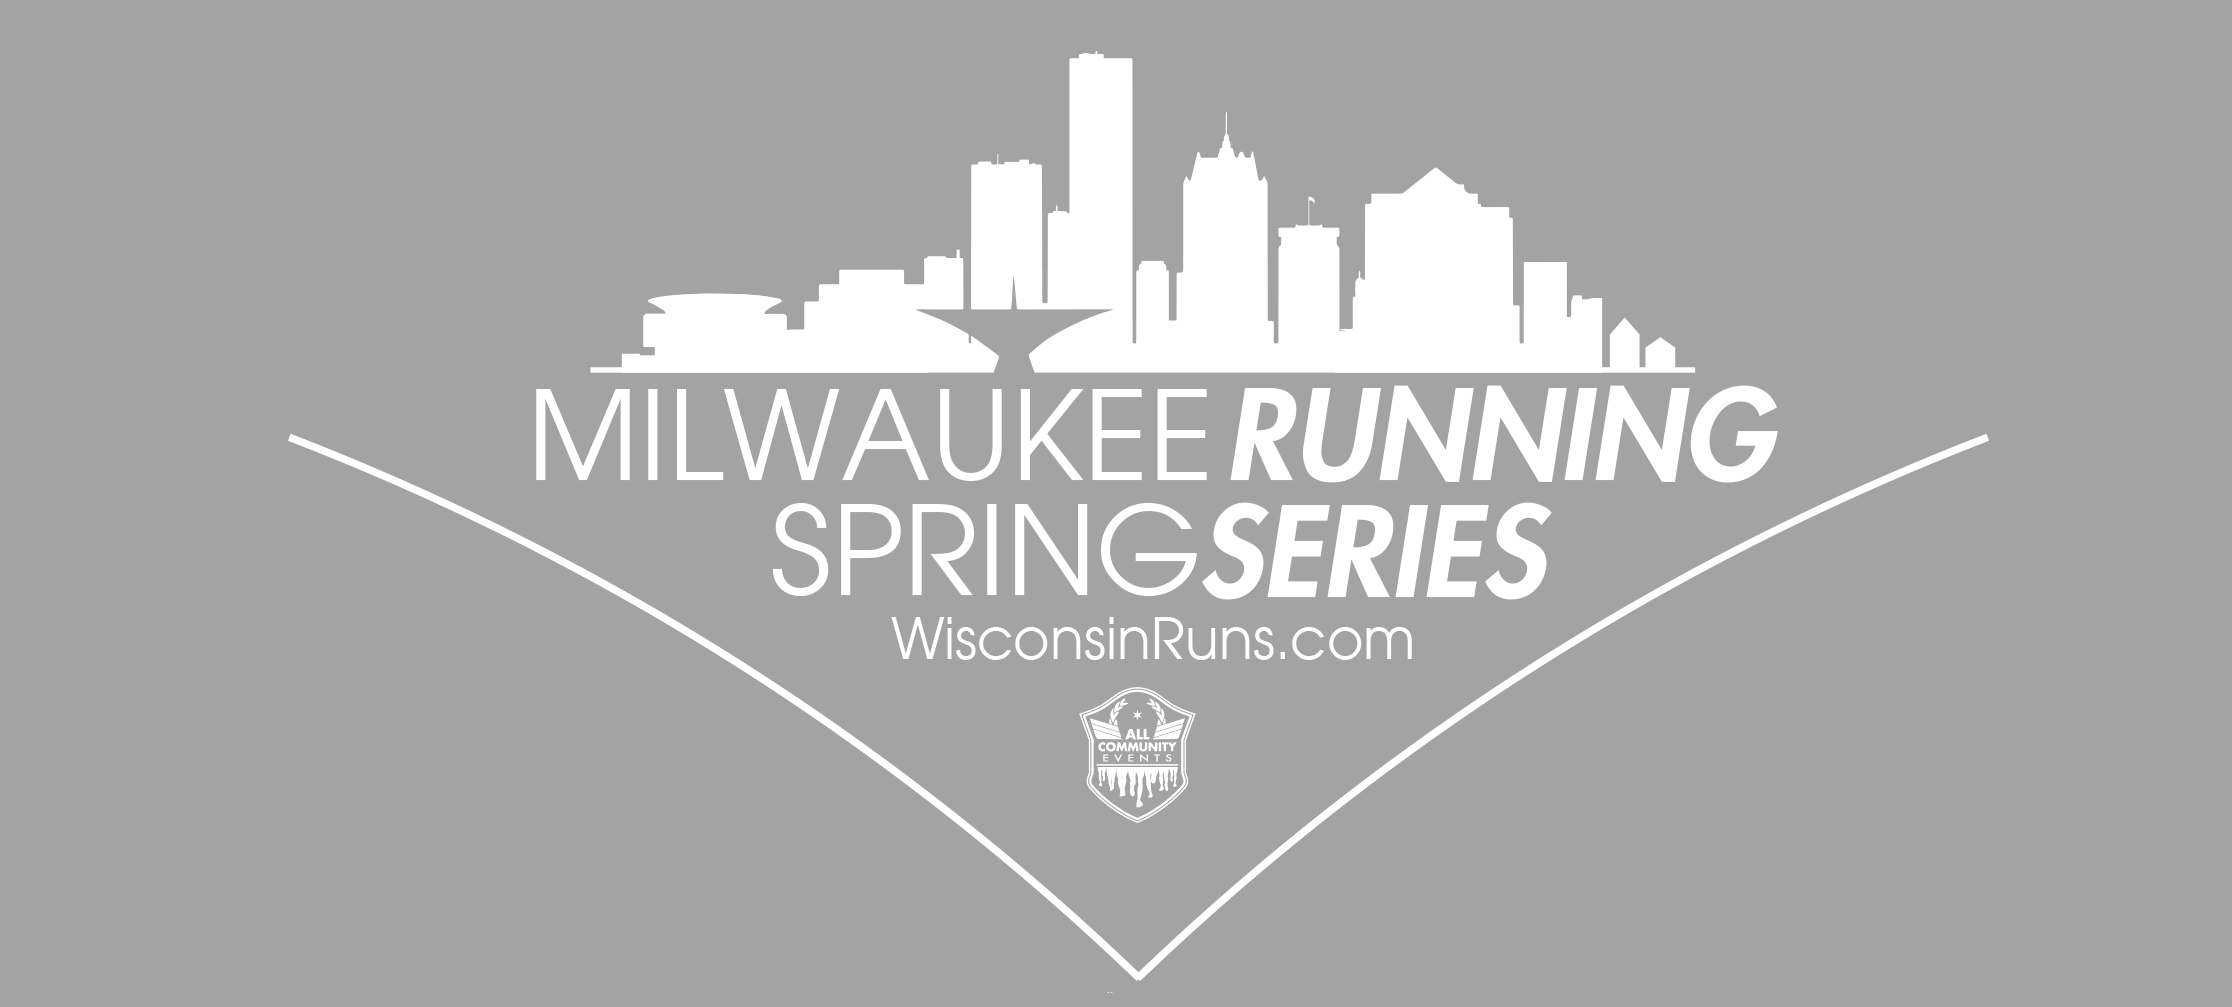 Milwuakee Spring Running Series Wisconsin Events